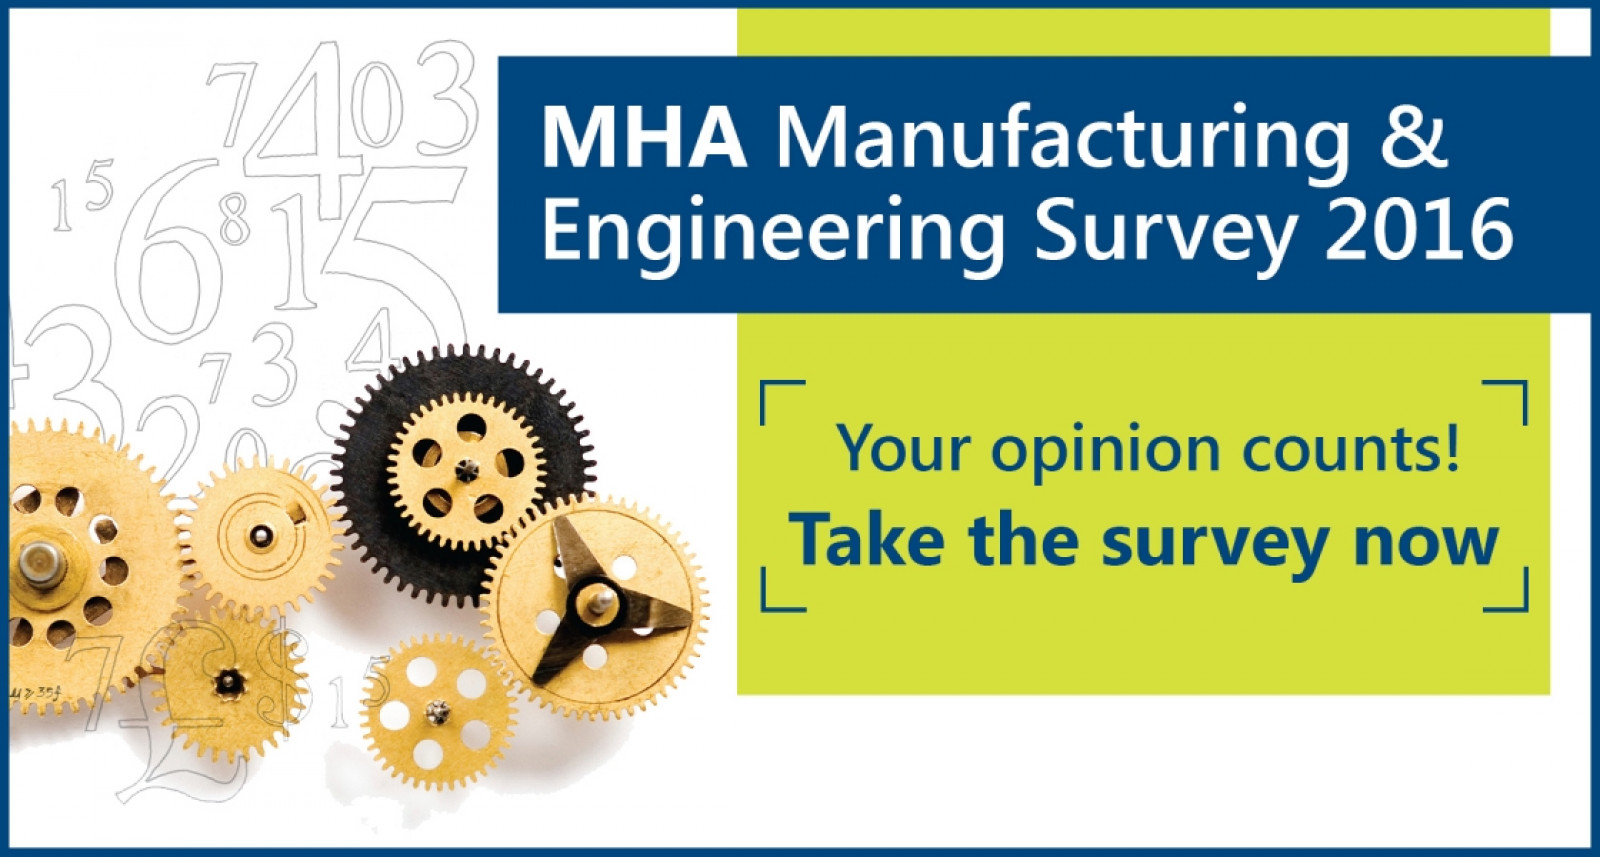 Our 2016/17 Manufacturing survey is now open